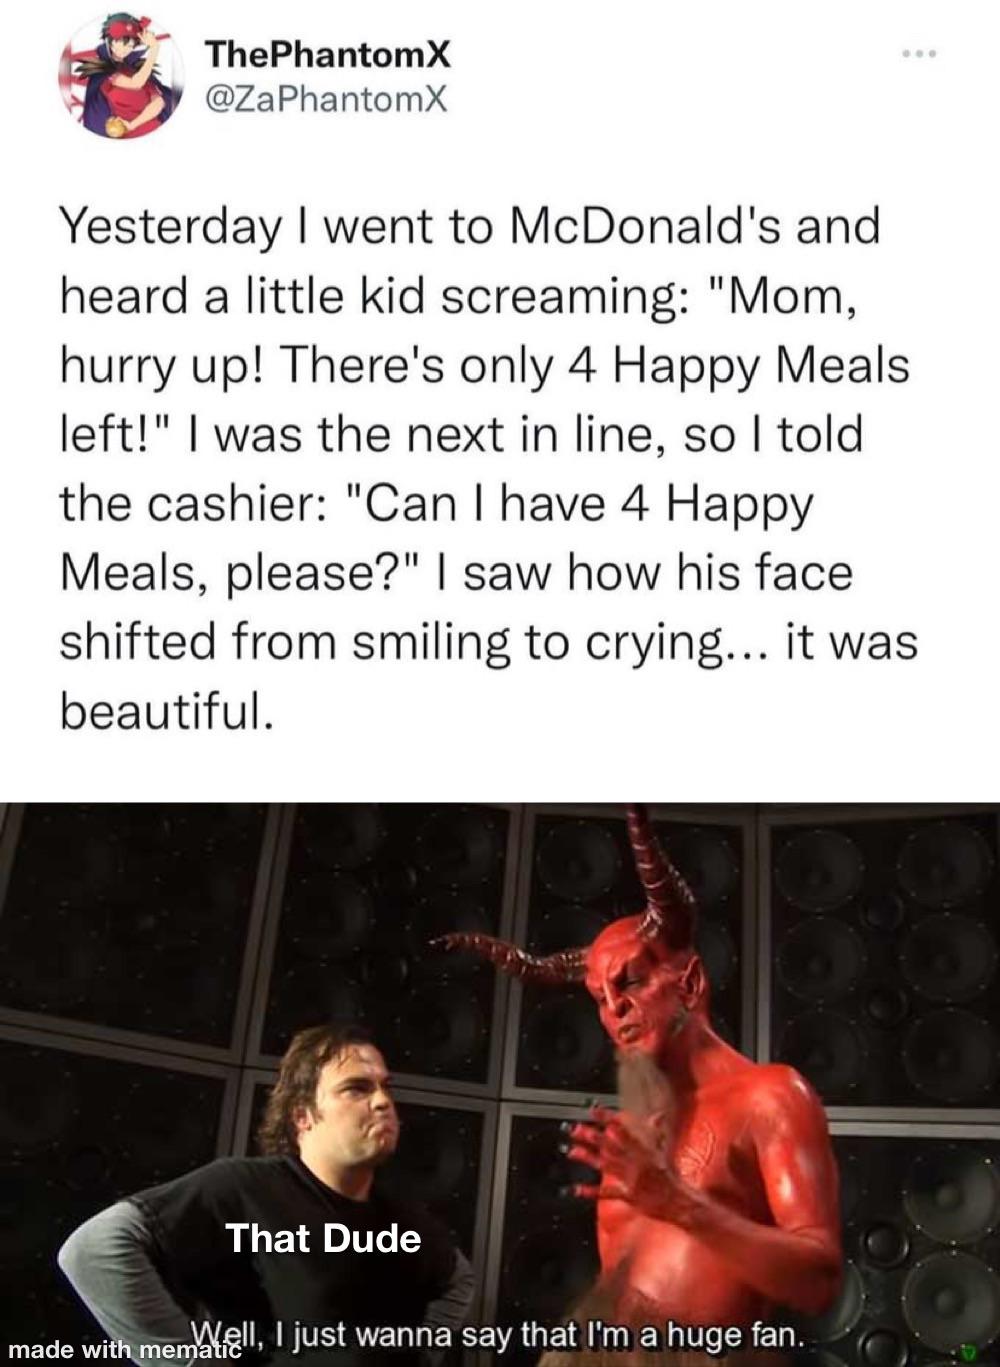 dank memes - funny memes - devil impressed meme - The PhantomX Yesterday I went to McDonald's and heard a little kid screaming "Mom, hurry up! There's only 4 Happy Meals left!" I was the next in line, so I told the cashier "Can I have 4 Happy Meals, pleas